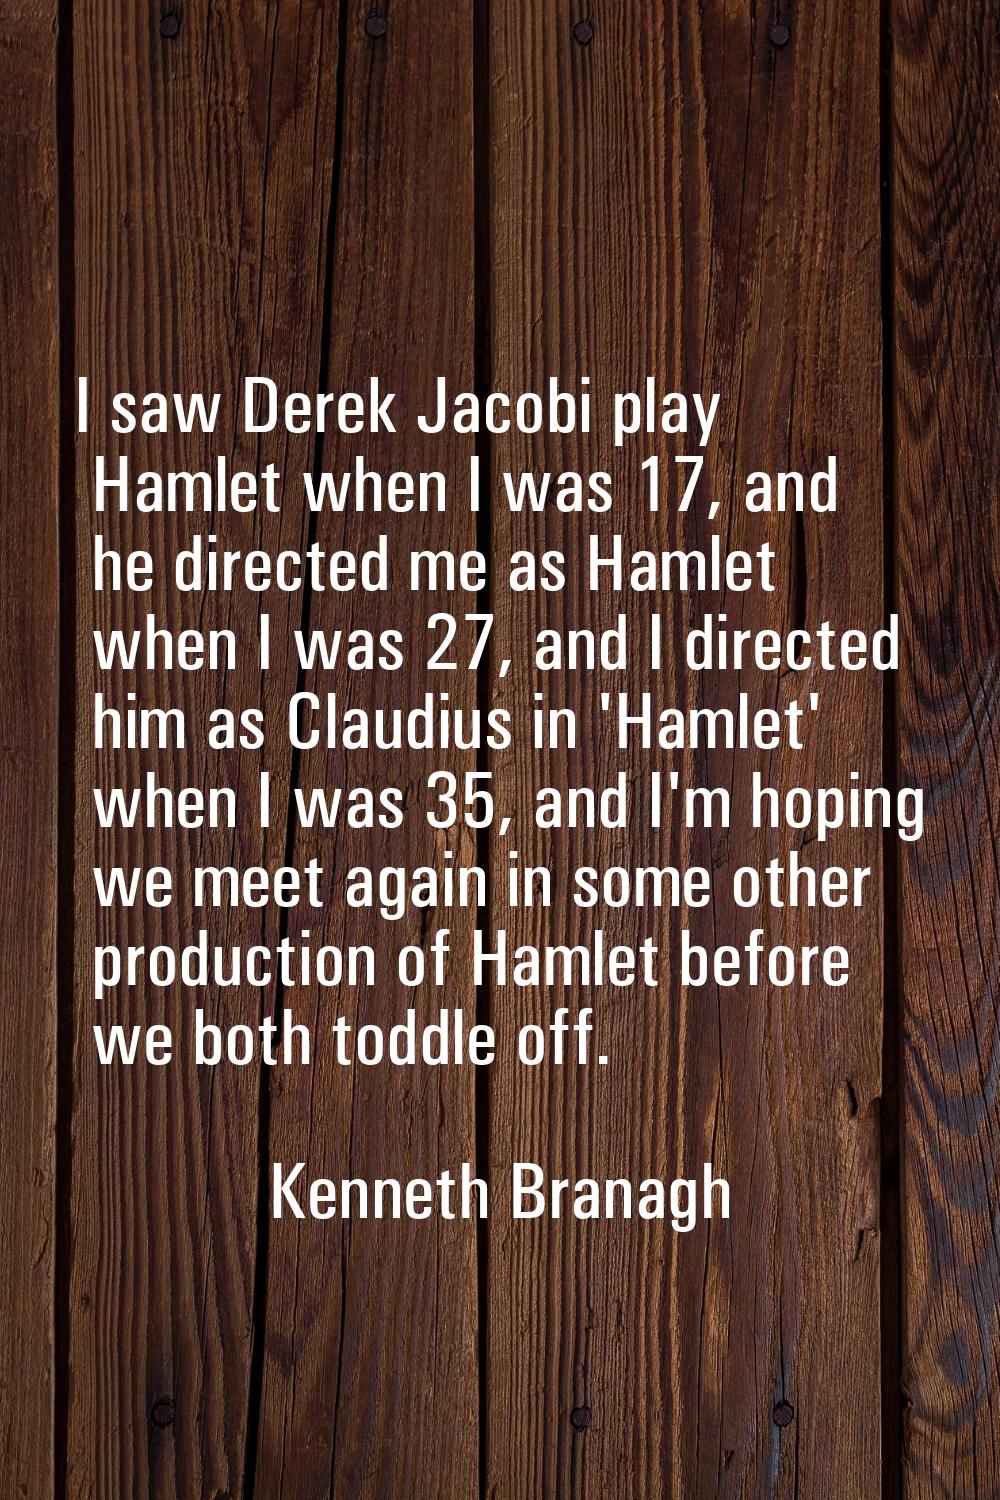 I saw Derek Jacobi play Hamlet when I was 17, and he directed me as Hamlet when I was 27, and I dir